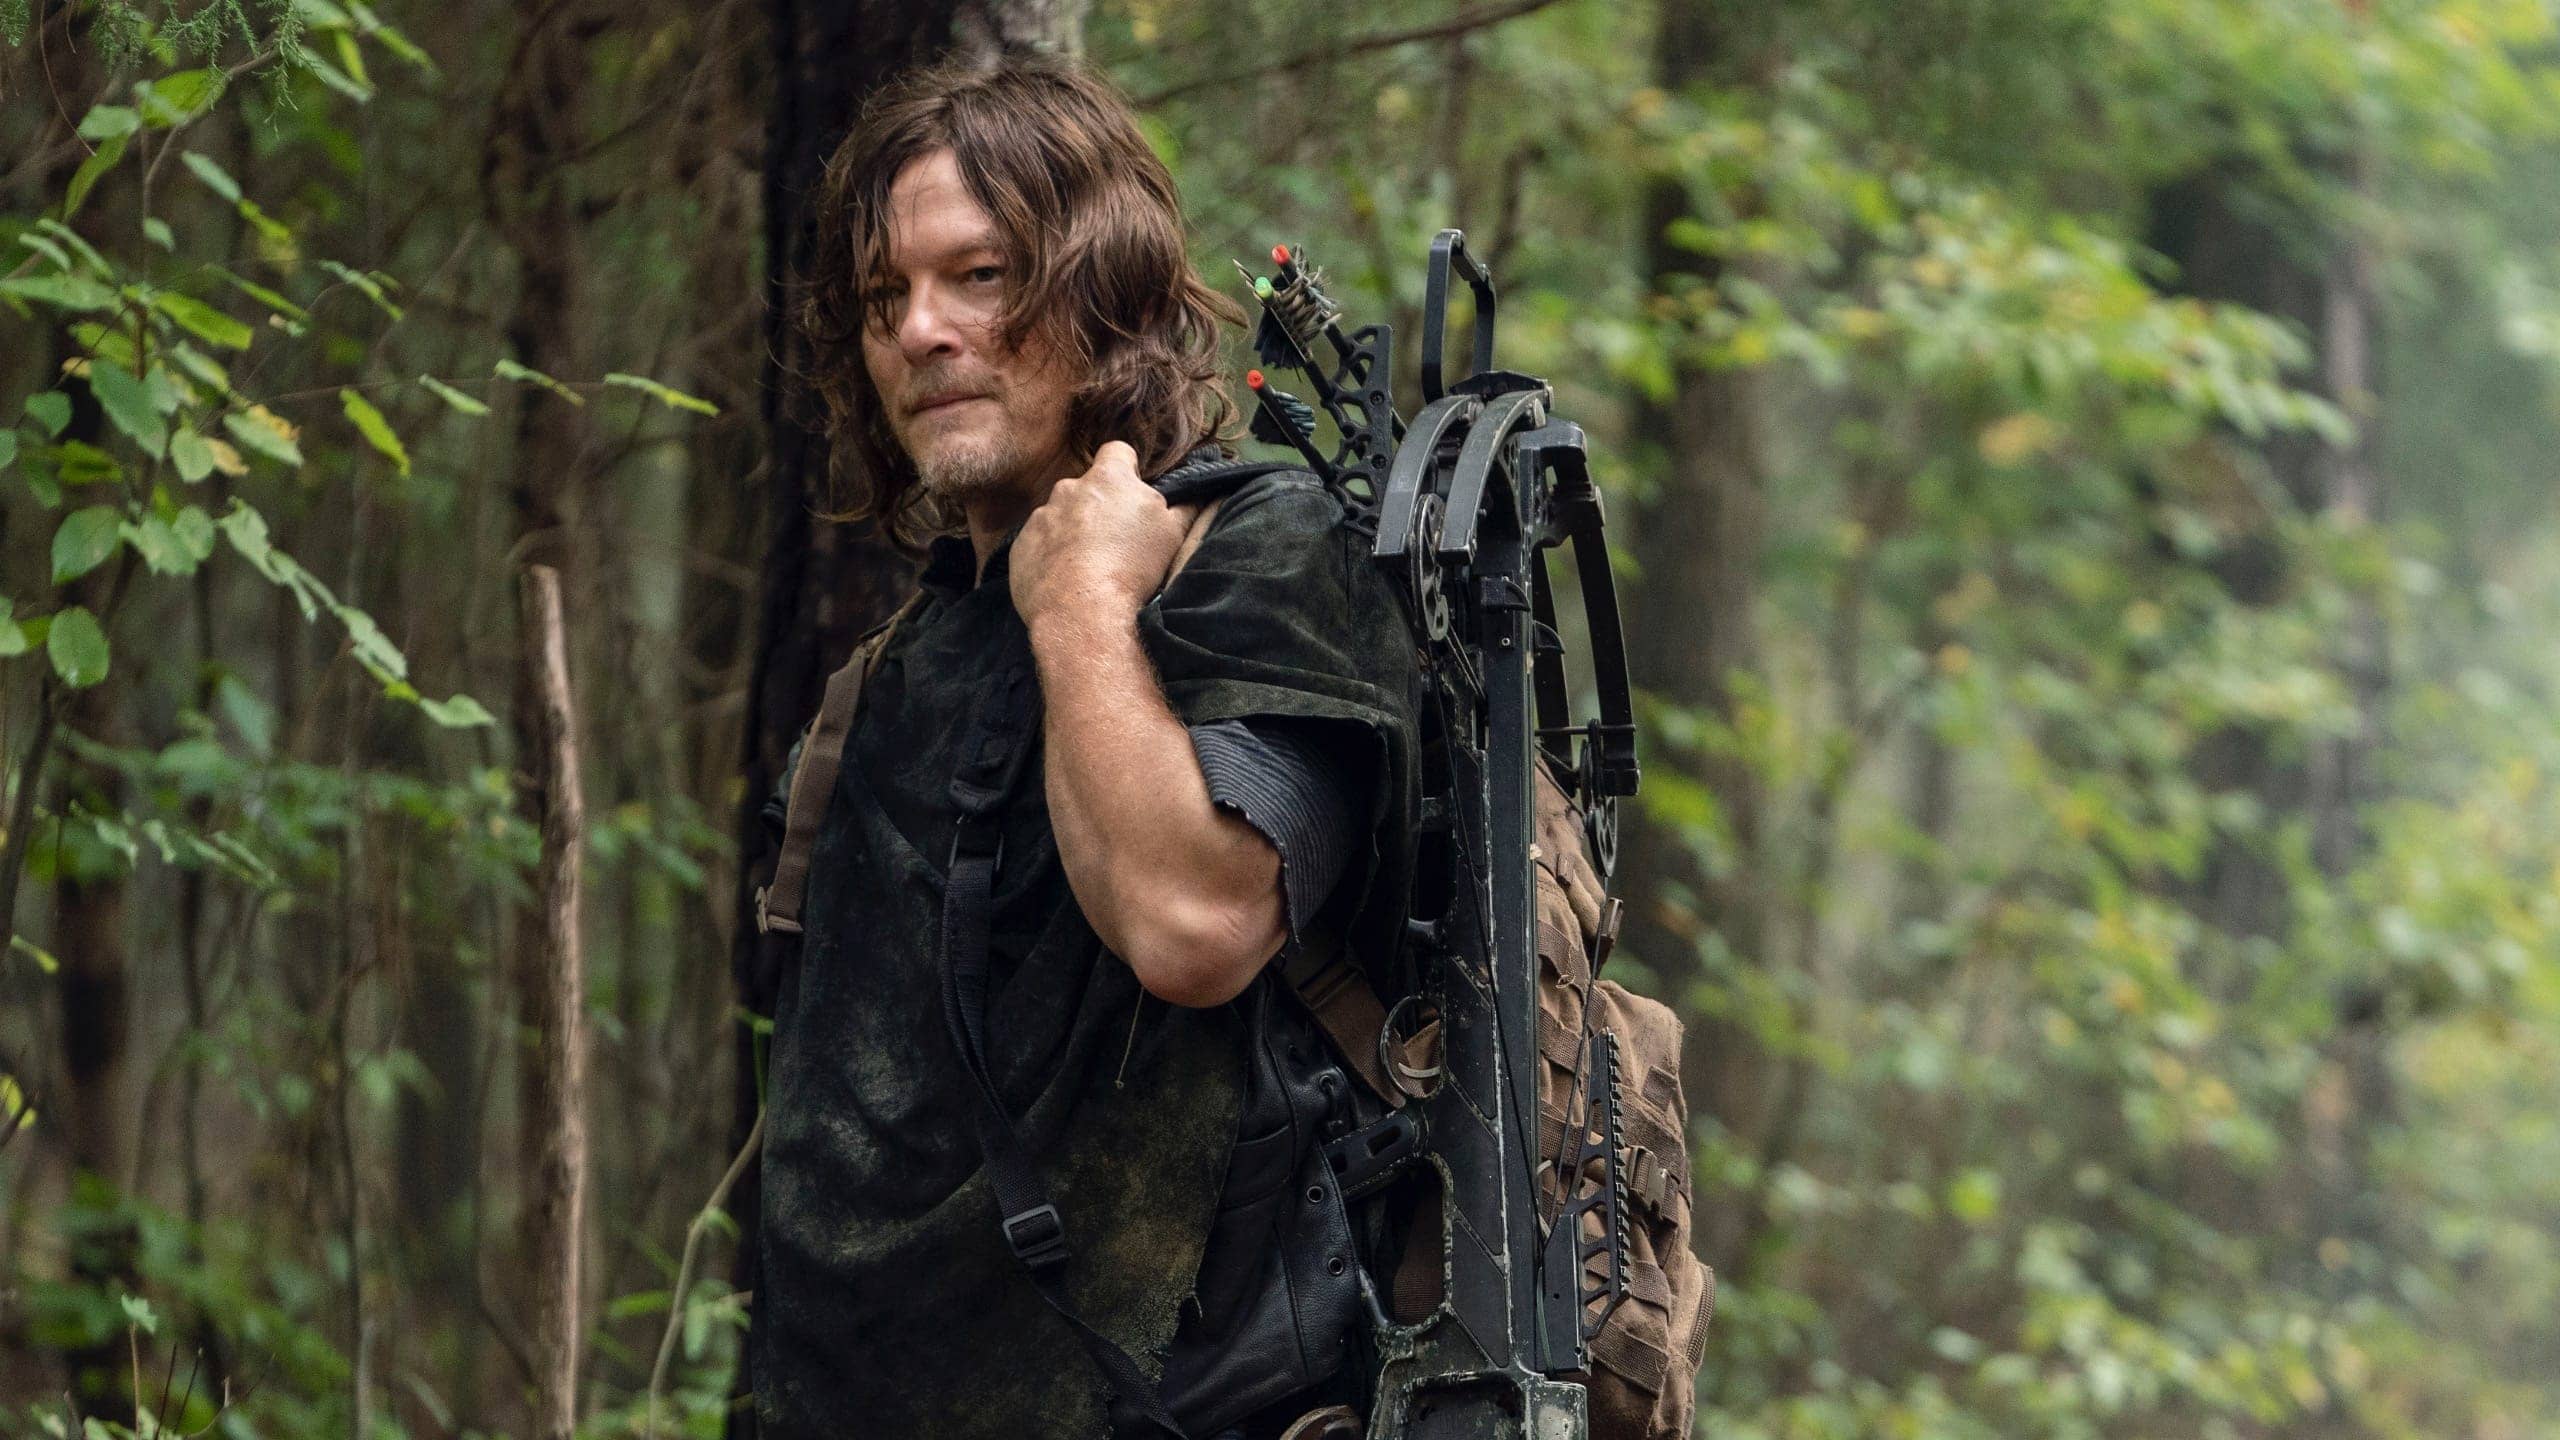 The Walking Dead: Best of Daryl Season 1 Episode 1 - Daryl's Story: Best of Daryl Edition